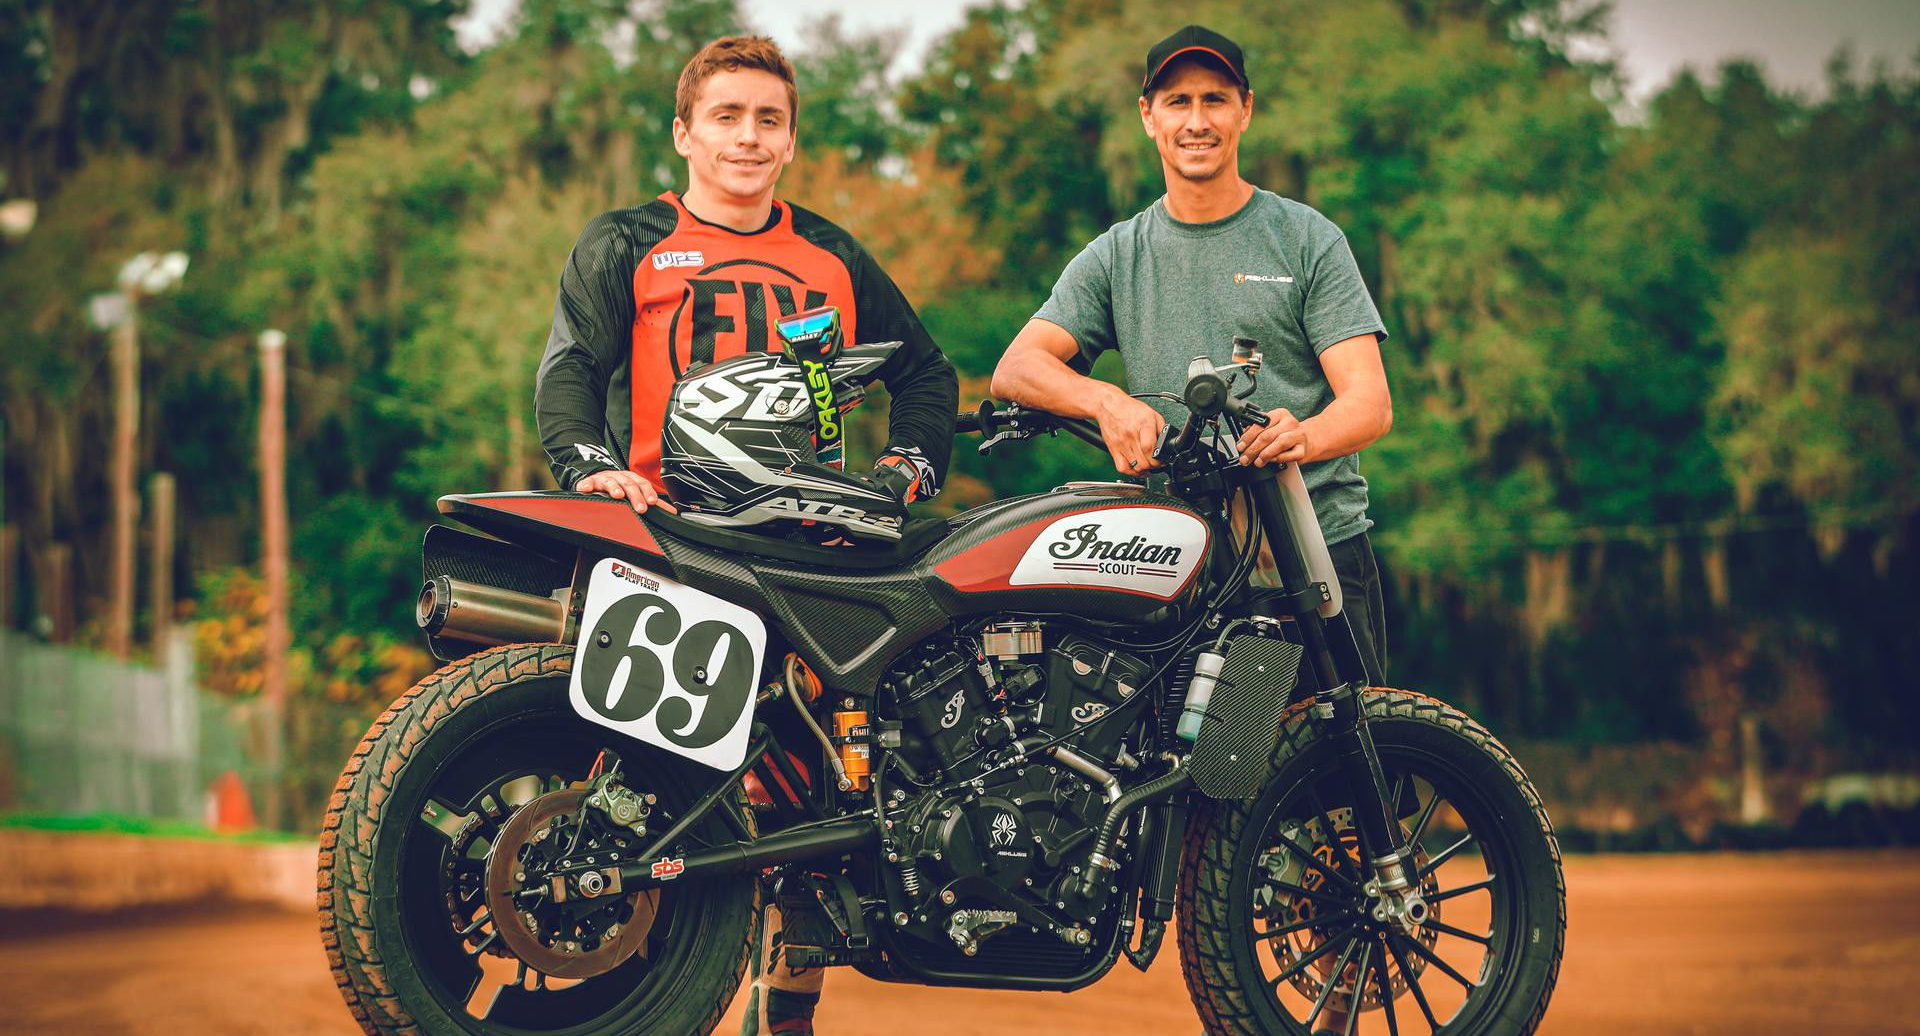 A view of Halbert with Zach Prescott of the Coolbeth-Nila Racing team